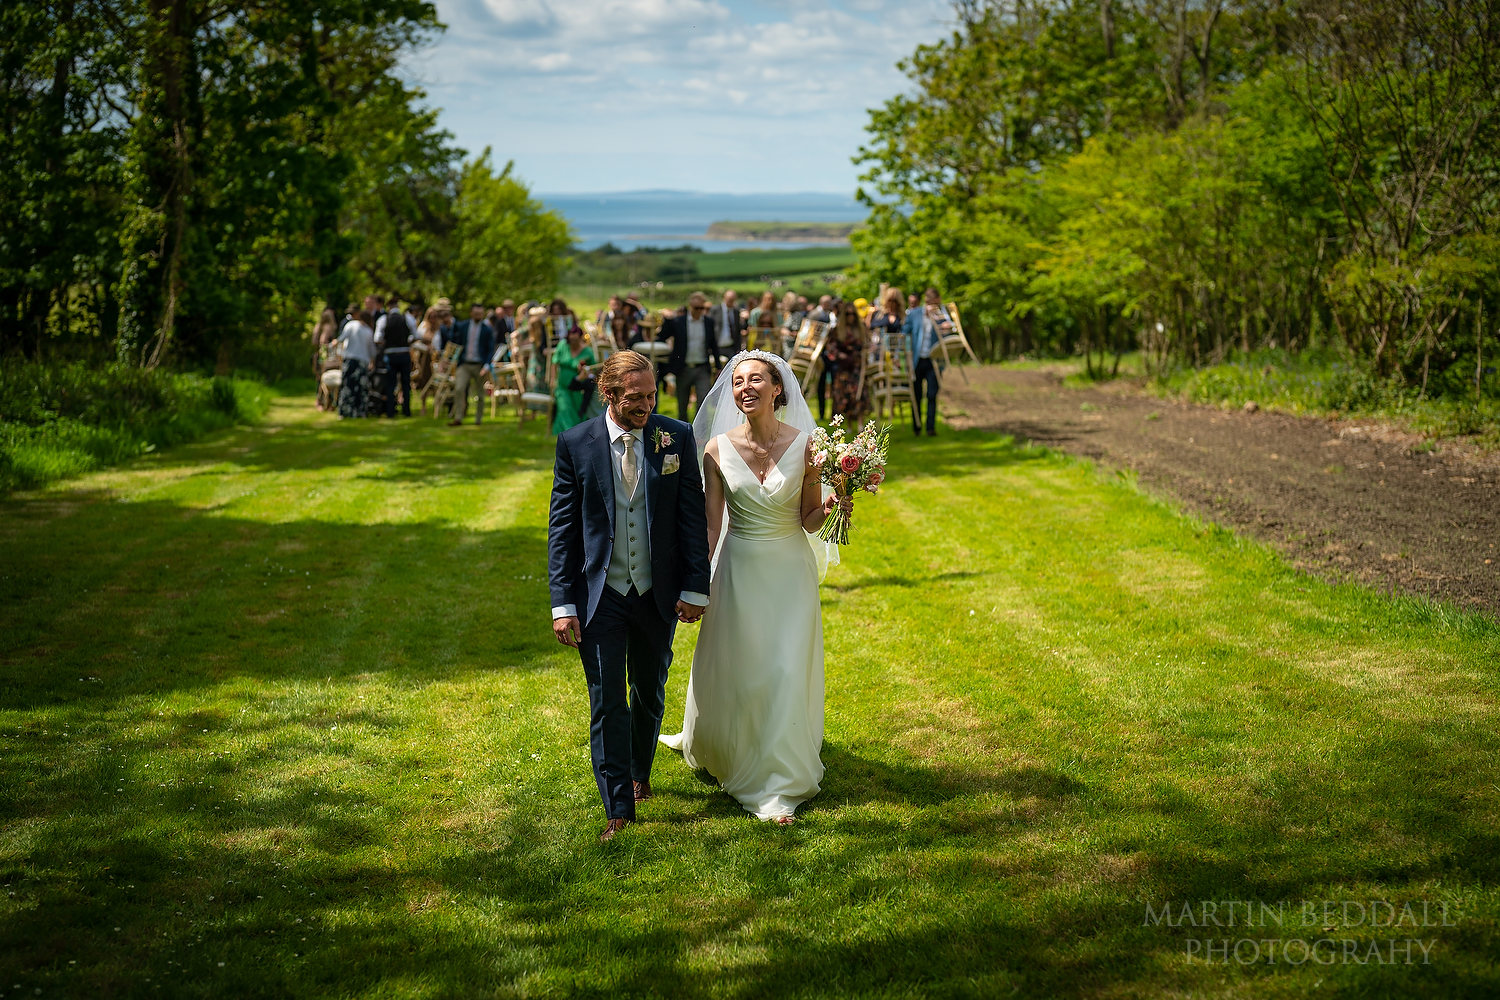 Bride and groom lead the guests to the wedding reception at Smedmore House